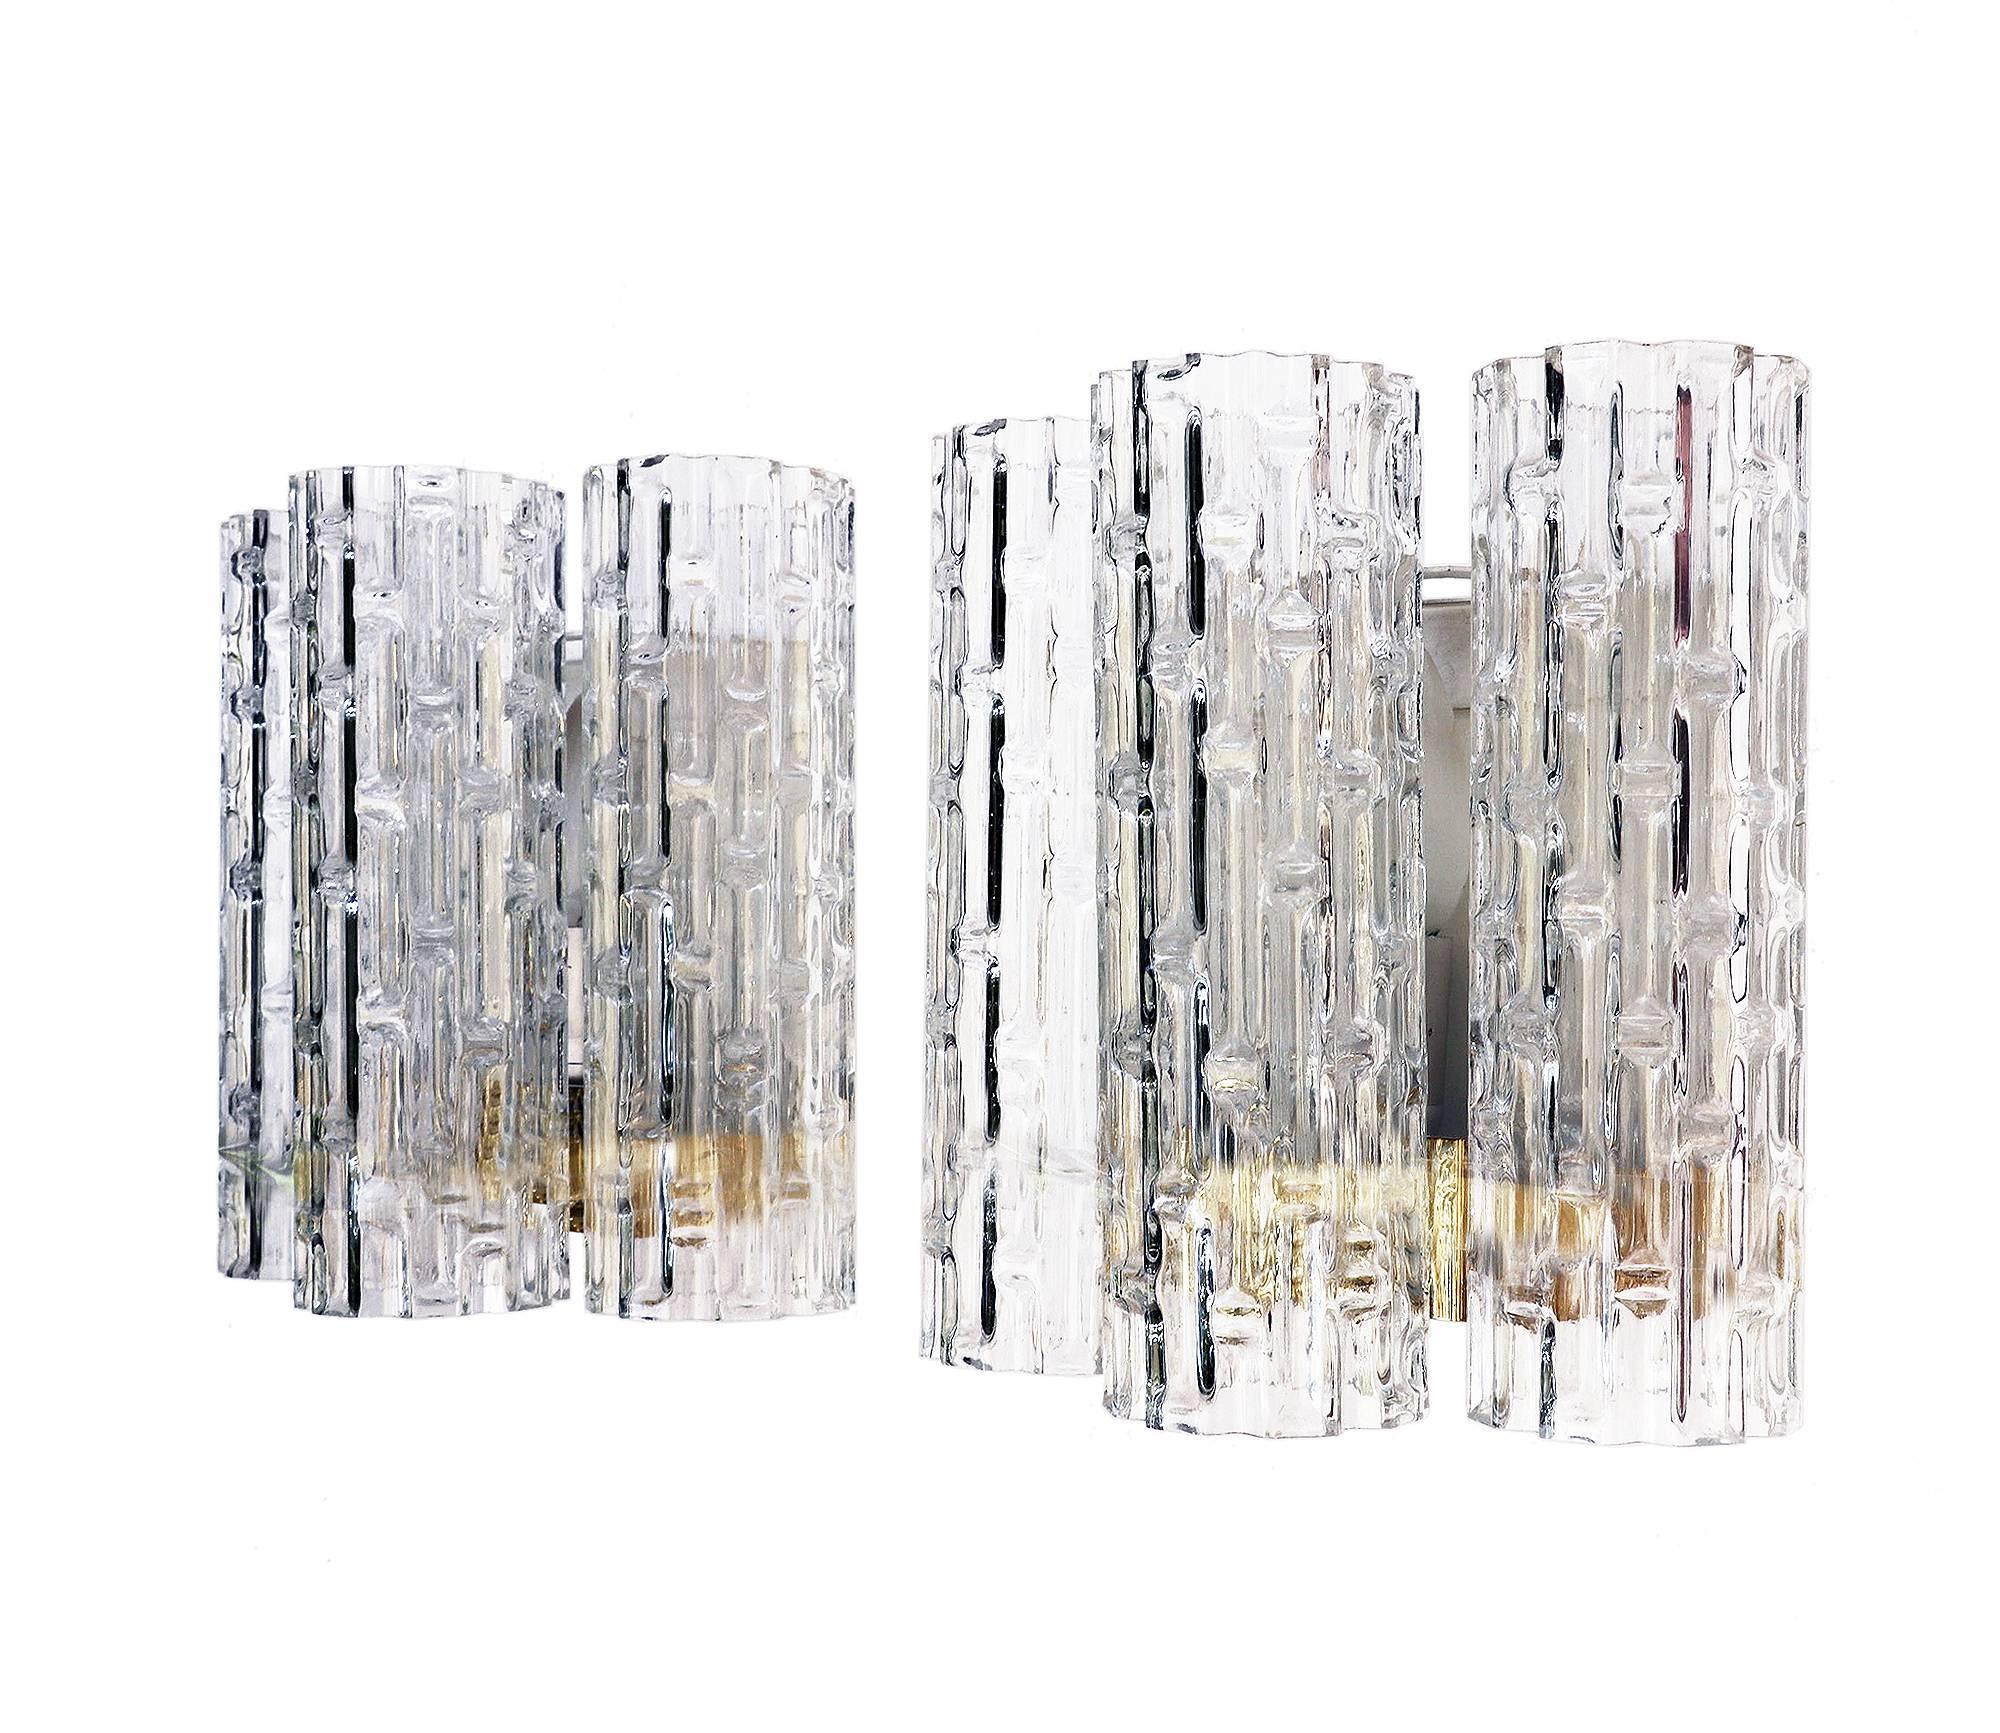 Elegant pair of mid century wall sconces with large textured Murano glass tubes on a metal frame. Designed by Wilhelm Braun Feldweg. The back-plate is made of white lacquered metal and polished brass. With this sconces you make a clear statement in